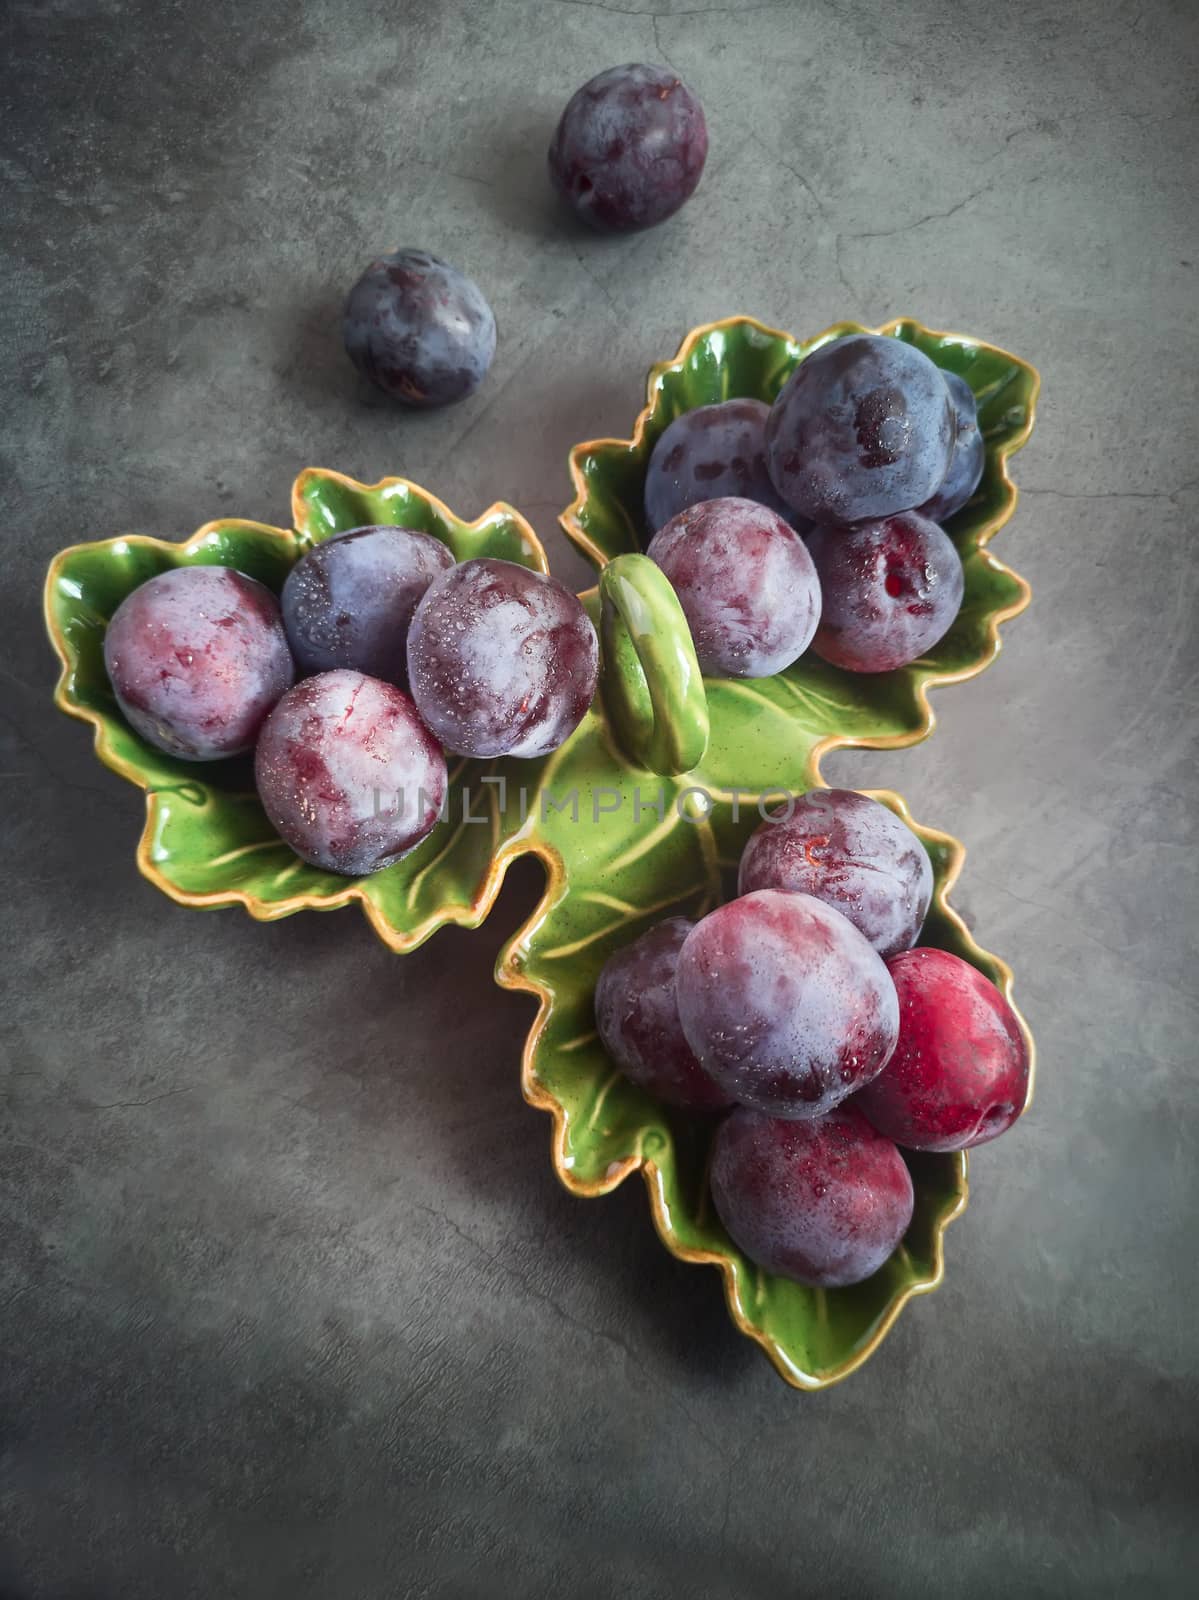 On the table in a ceramic dish are large ripe plums. Presented in close-up on a dark background.